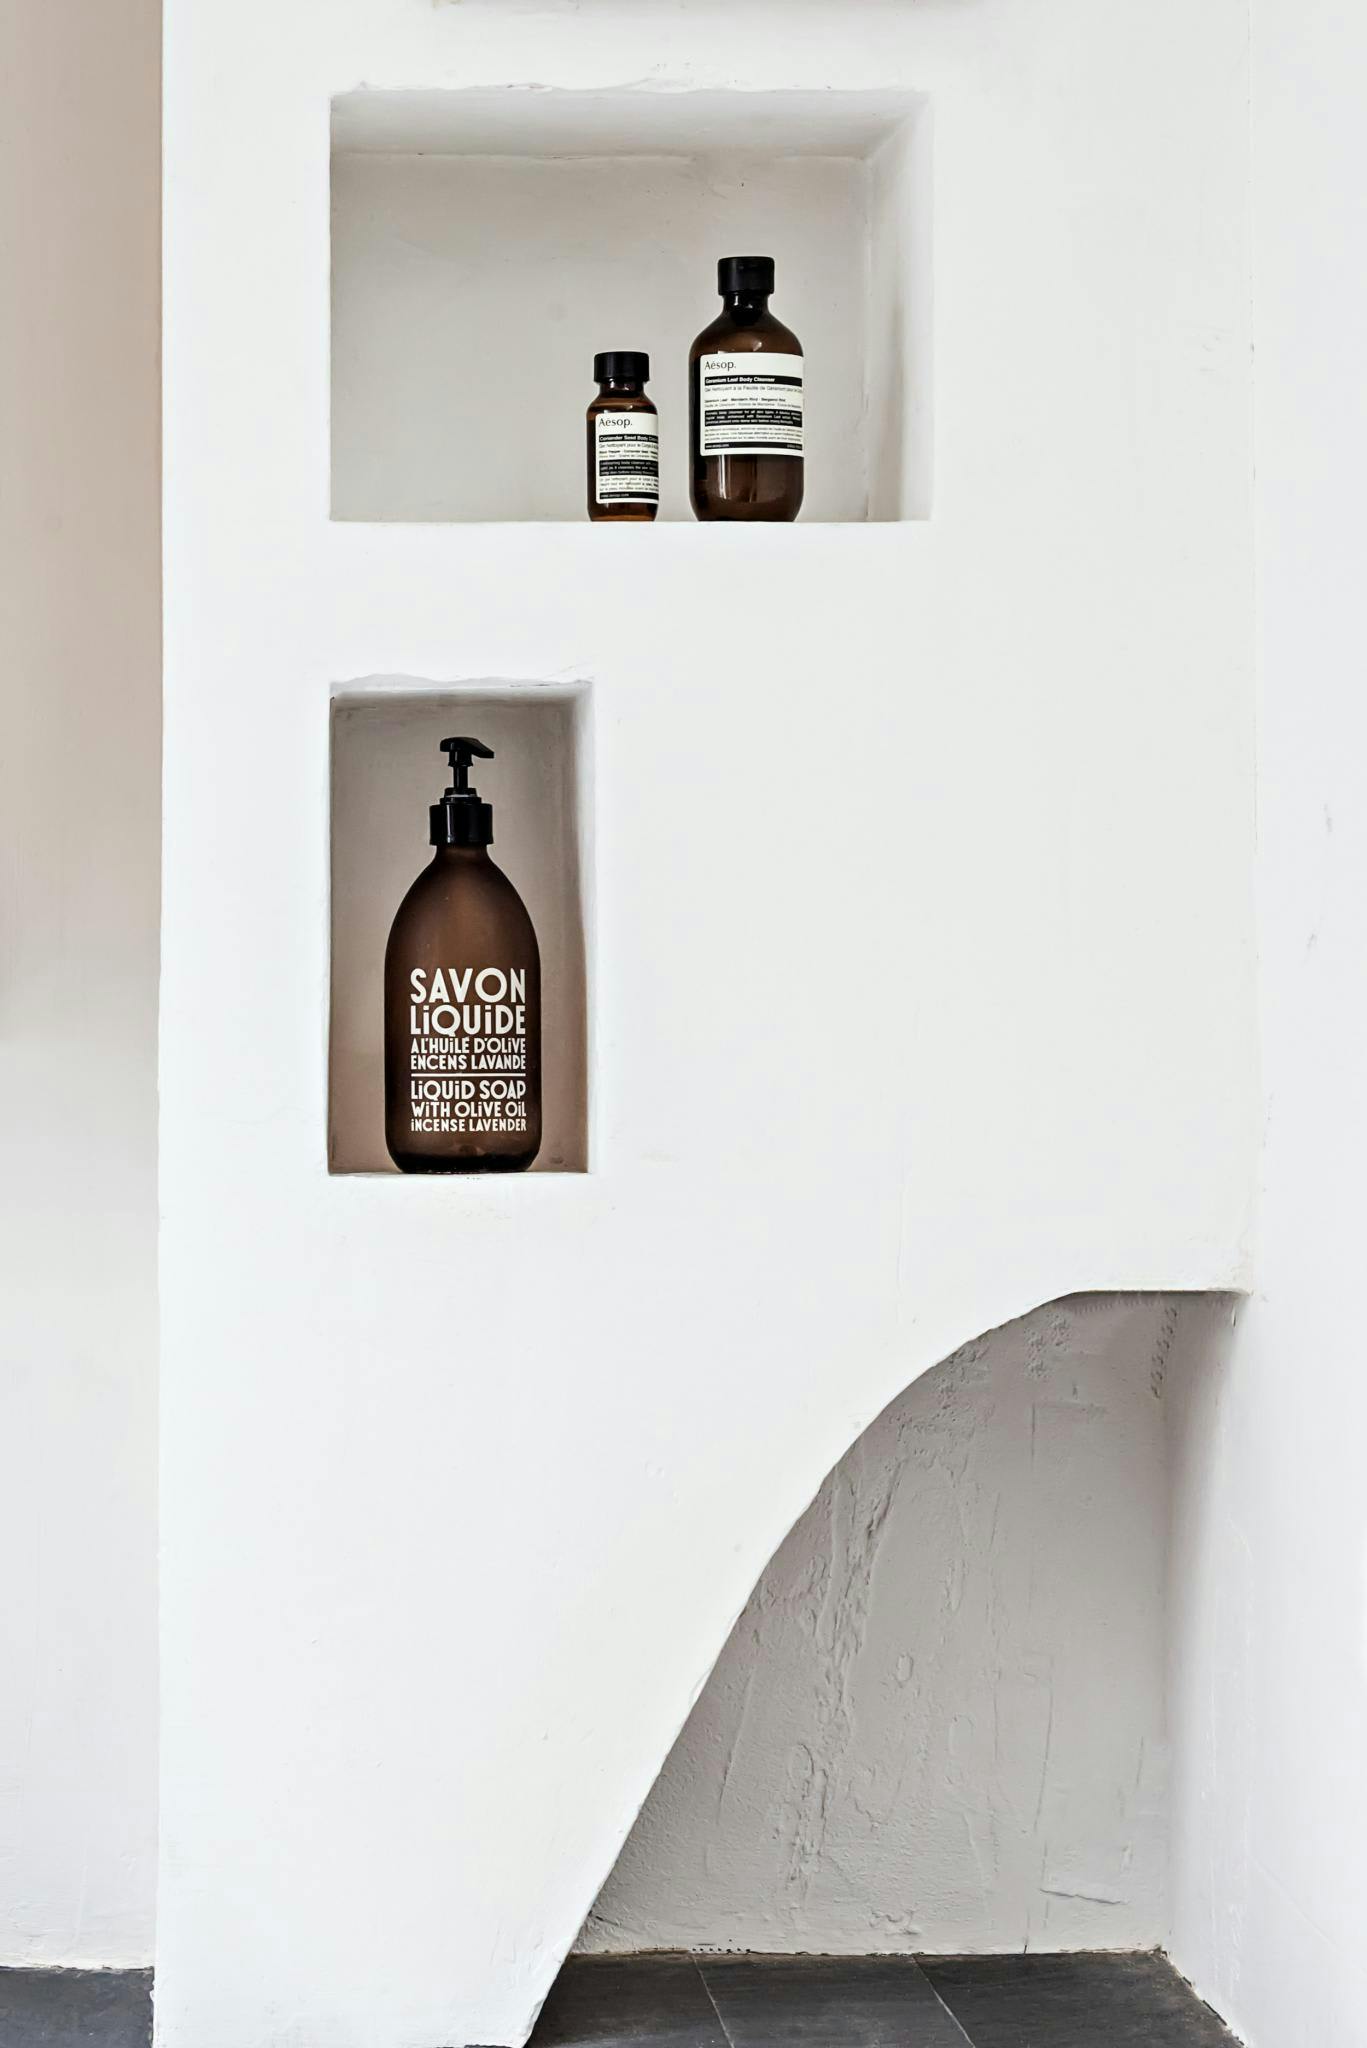 A white shelf with a bottle of soap and a bottle of shampoo is displayed in a bathroom setting.